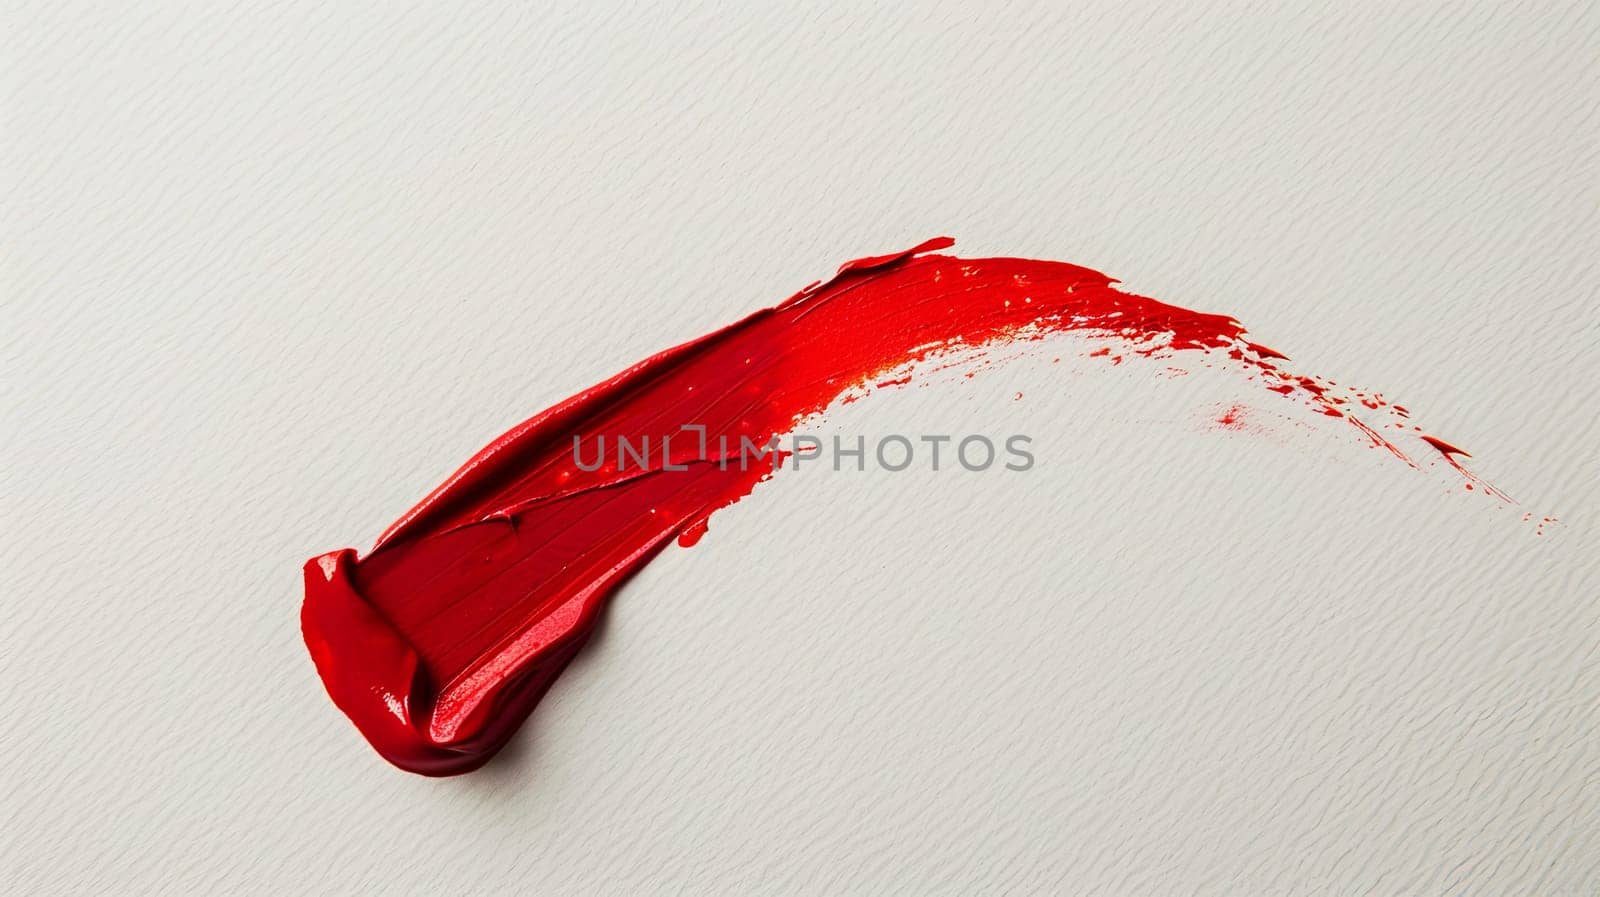 A close up of a red lipstick smudge on a white surface.